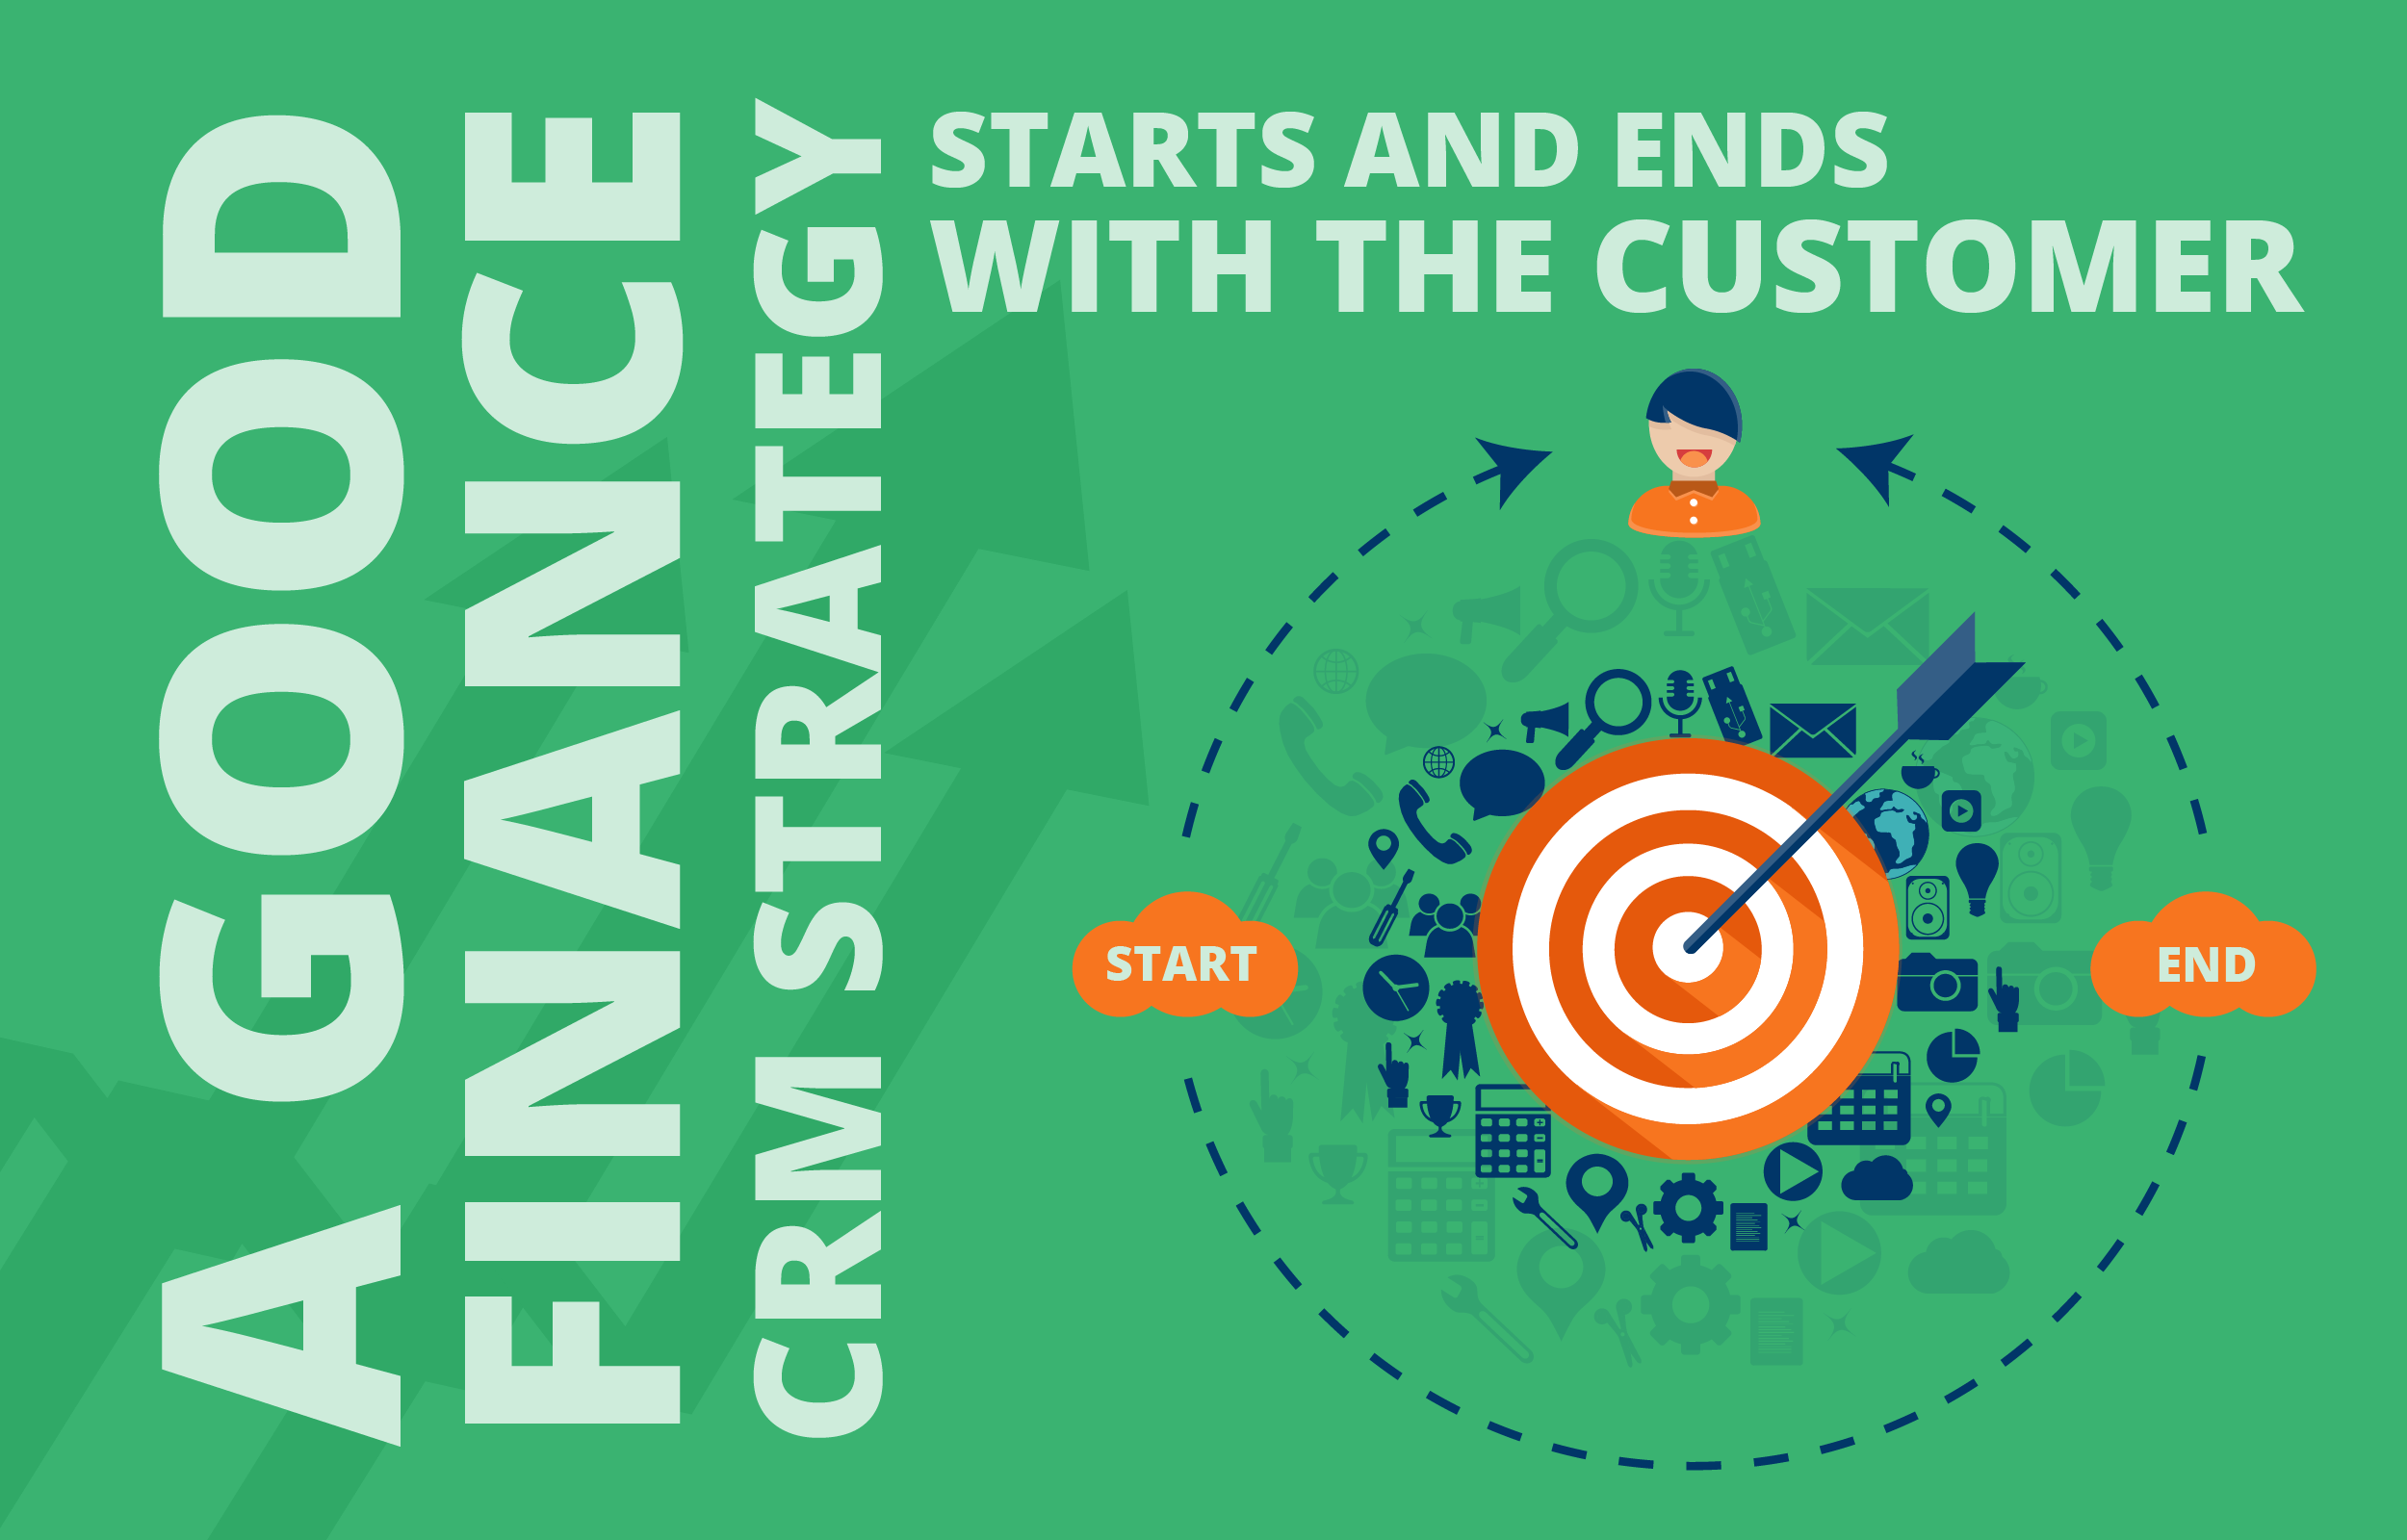 A Good Finance CRM Strategy Starts and Ends with the Customer